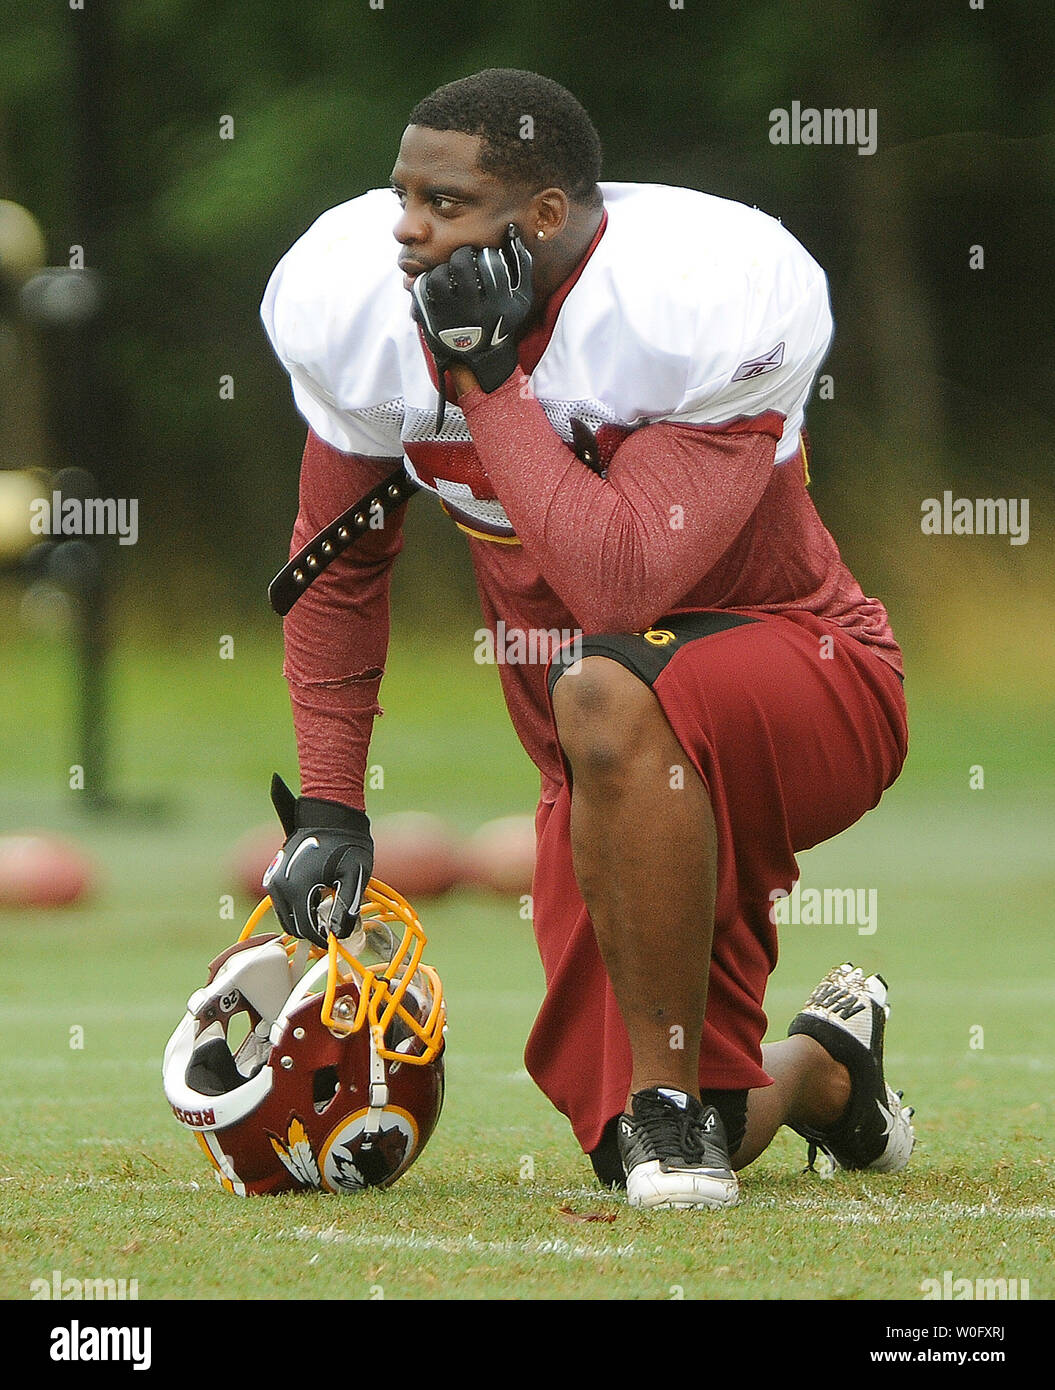 Washington Redskins running back Clinton Portis watches as play are run  during practice at Redskins Park in Ashburn, Virginia, on August 5, 2010.  UPI/Roger L. Wollenberg Stock Photo - Alamy